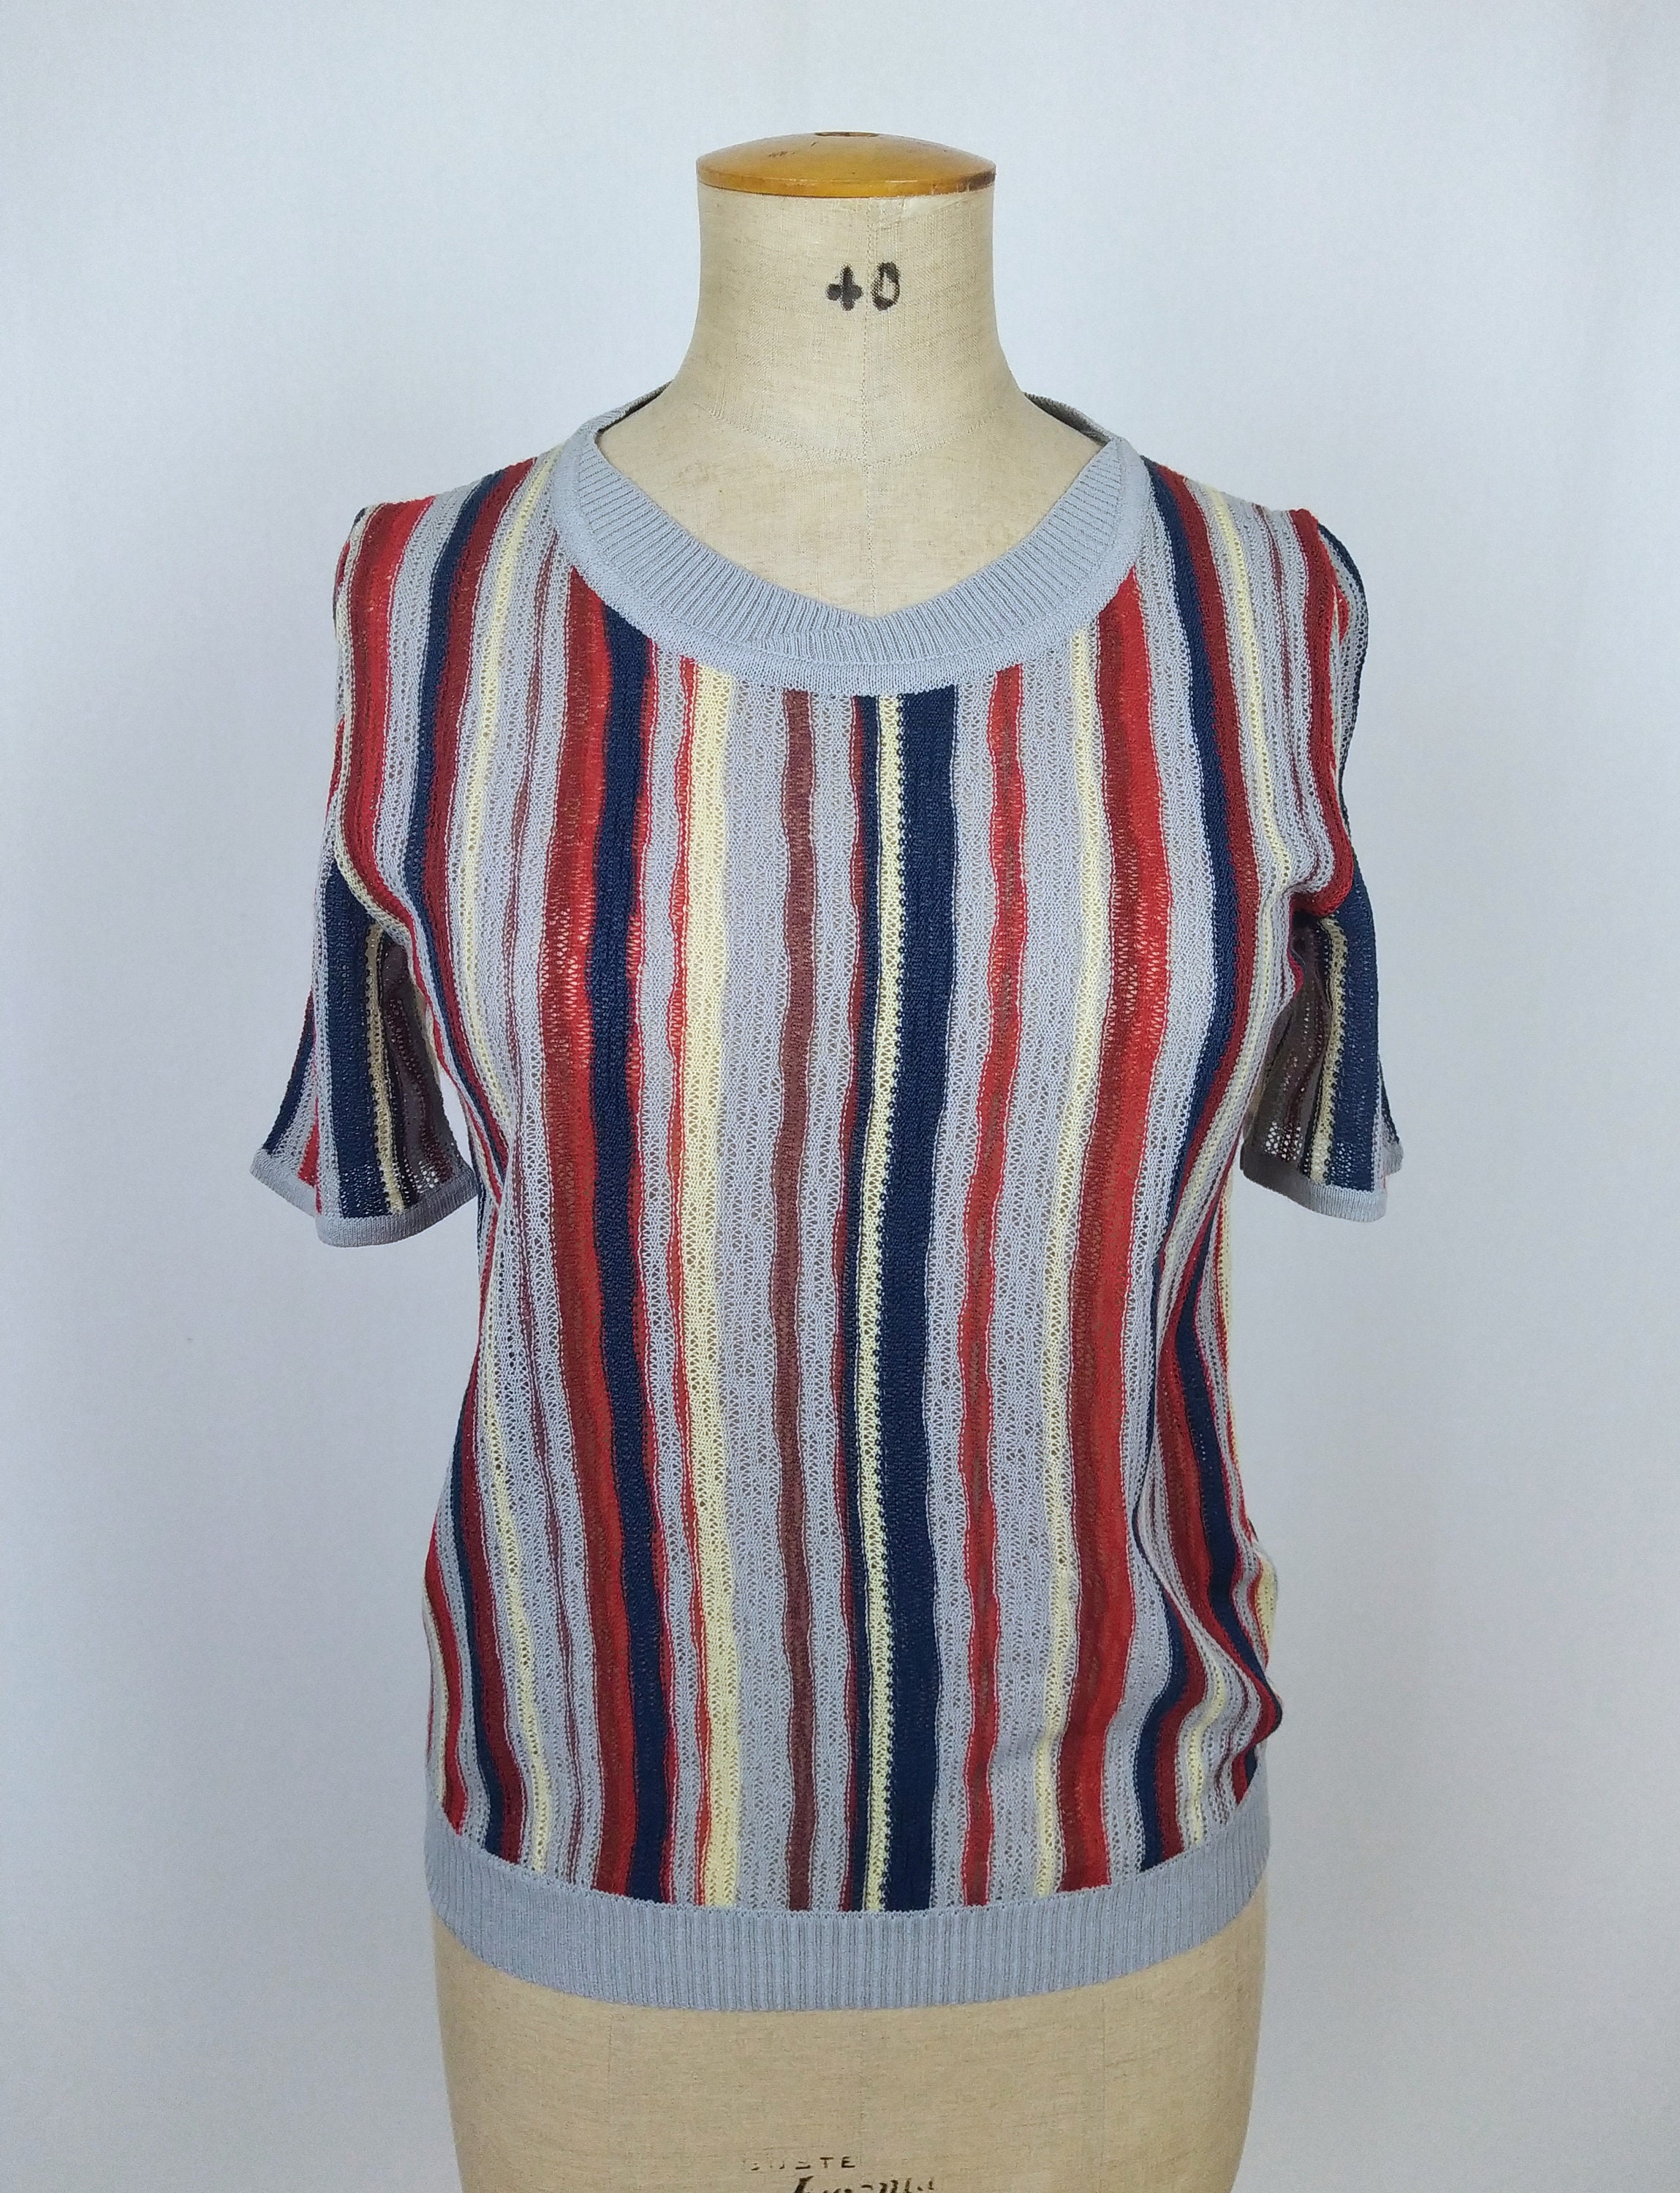 CHRISTIAN DIOR vintage 80s multicolor striped open knit top